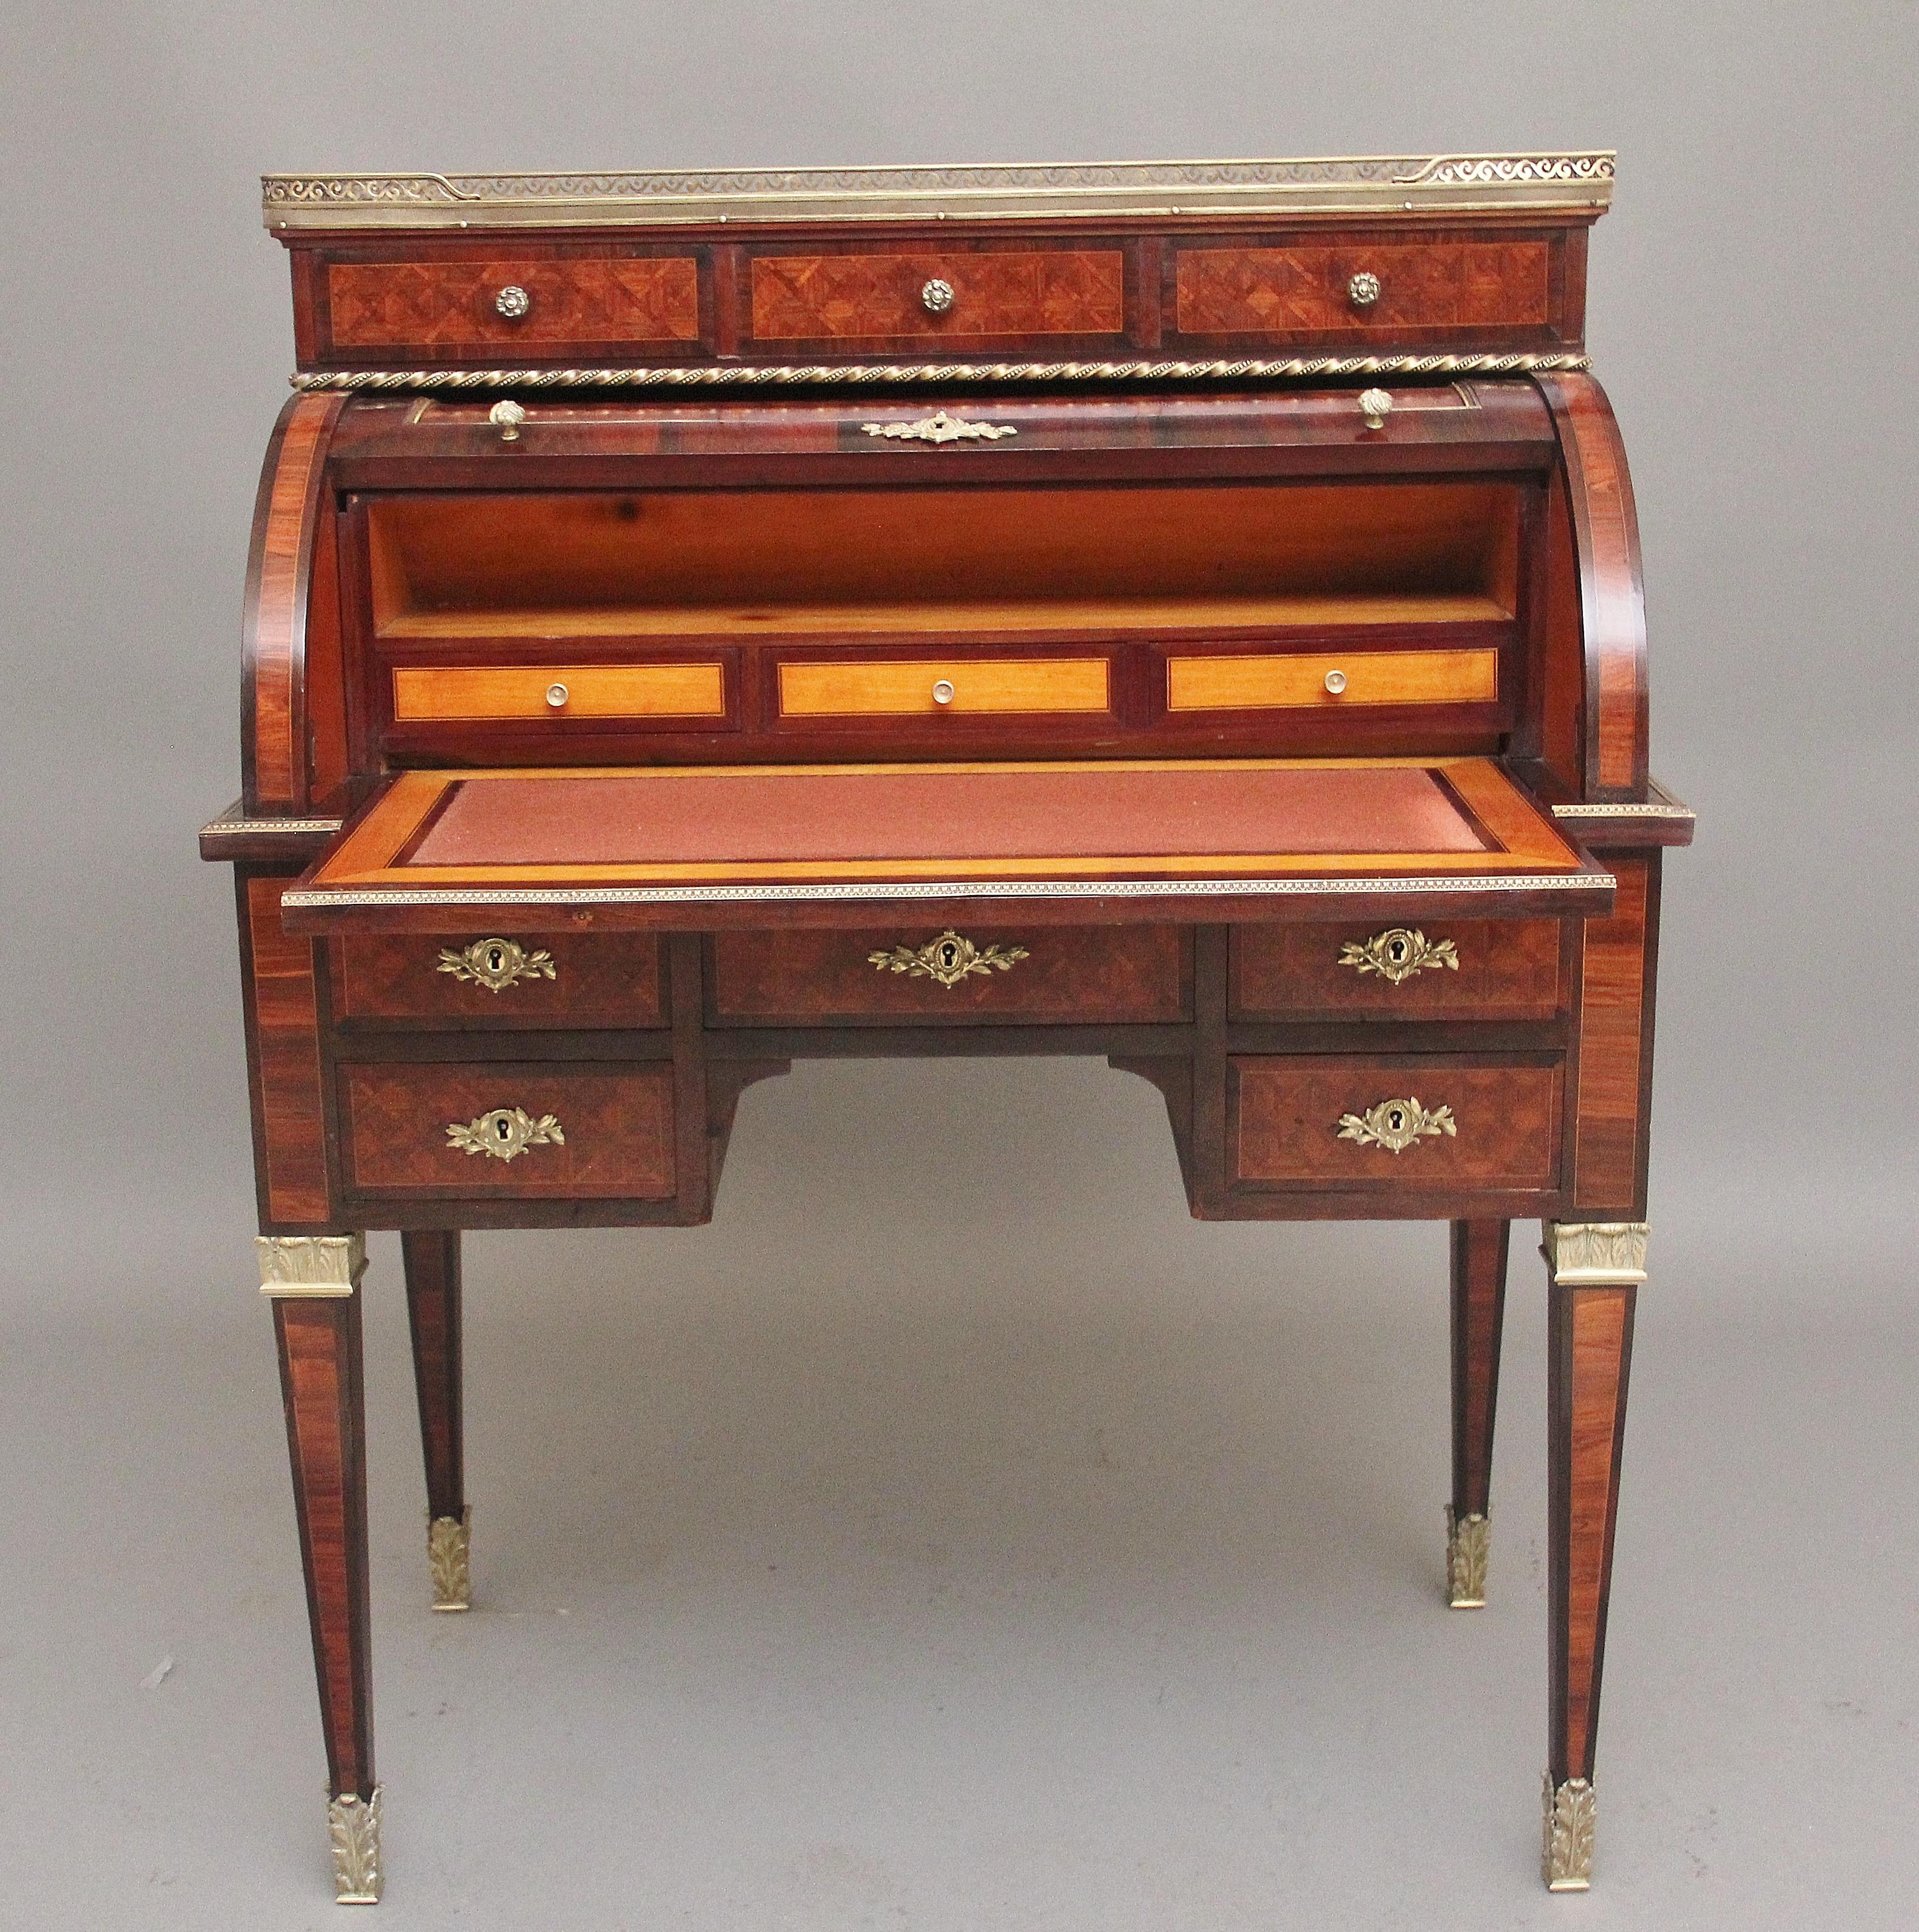 19th Century French Kingwood cylinder desk of exceptional quality, the top structure having a pierced brass gallery with a veined marble top and three drawers below with decorative ormolu moulding running along the bottom, the cylinder lifting up to